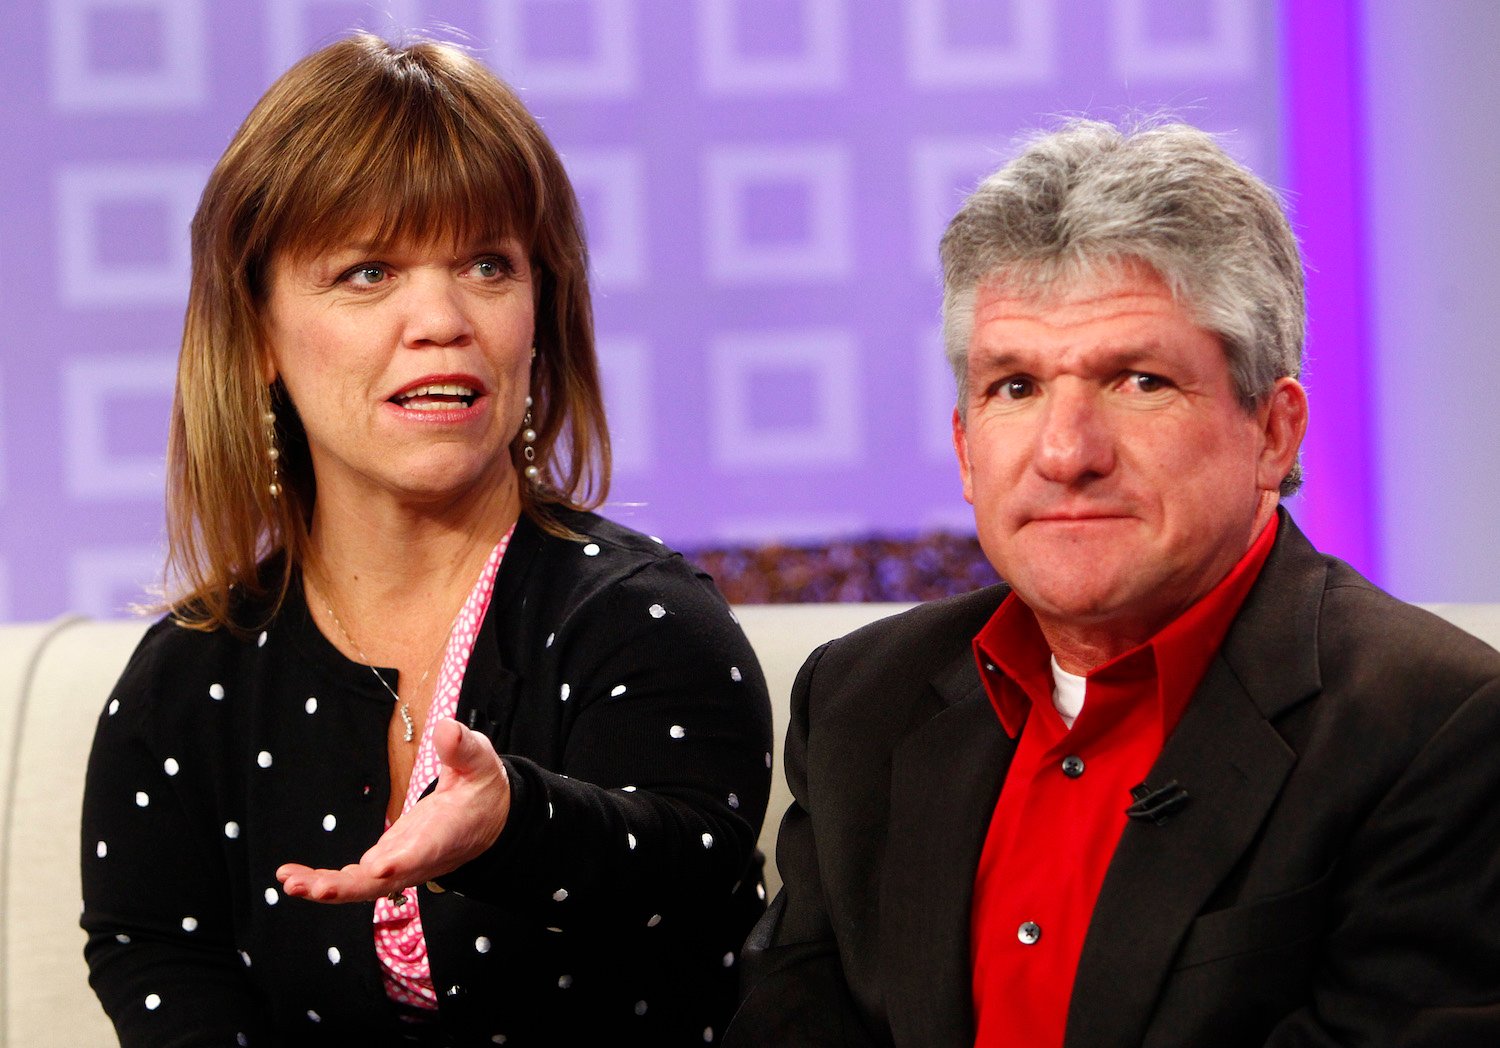 Amy Roloff and Matt Roloff from 'Little People, Big World' sitting during an interview against a purple background